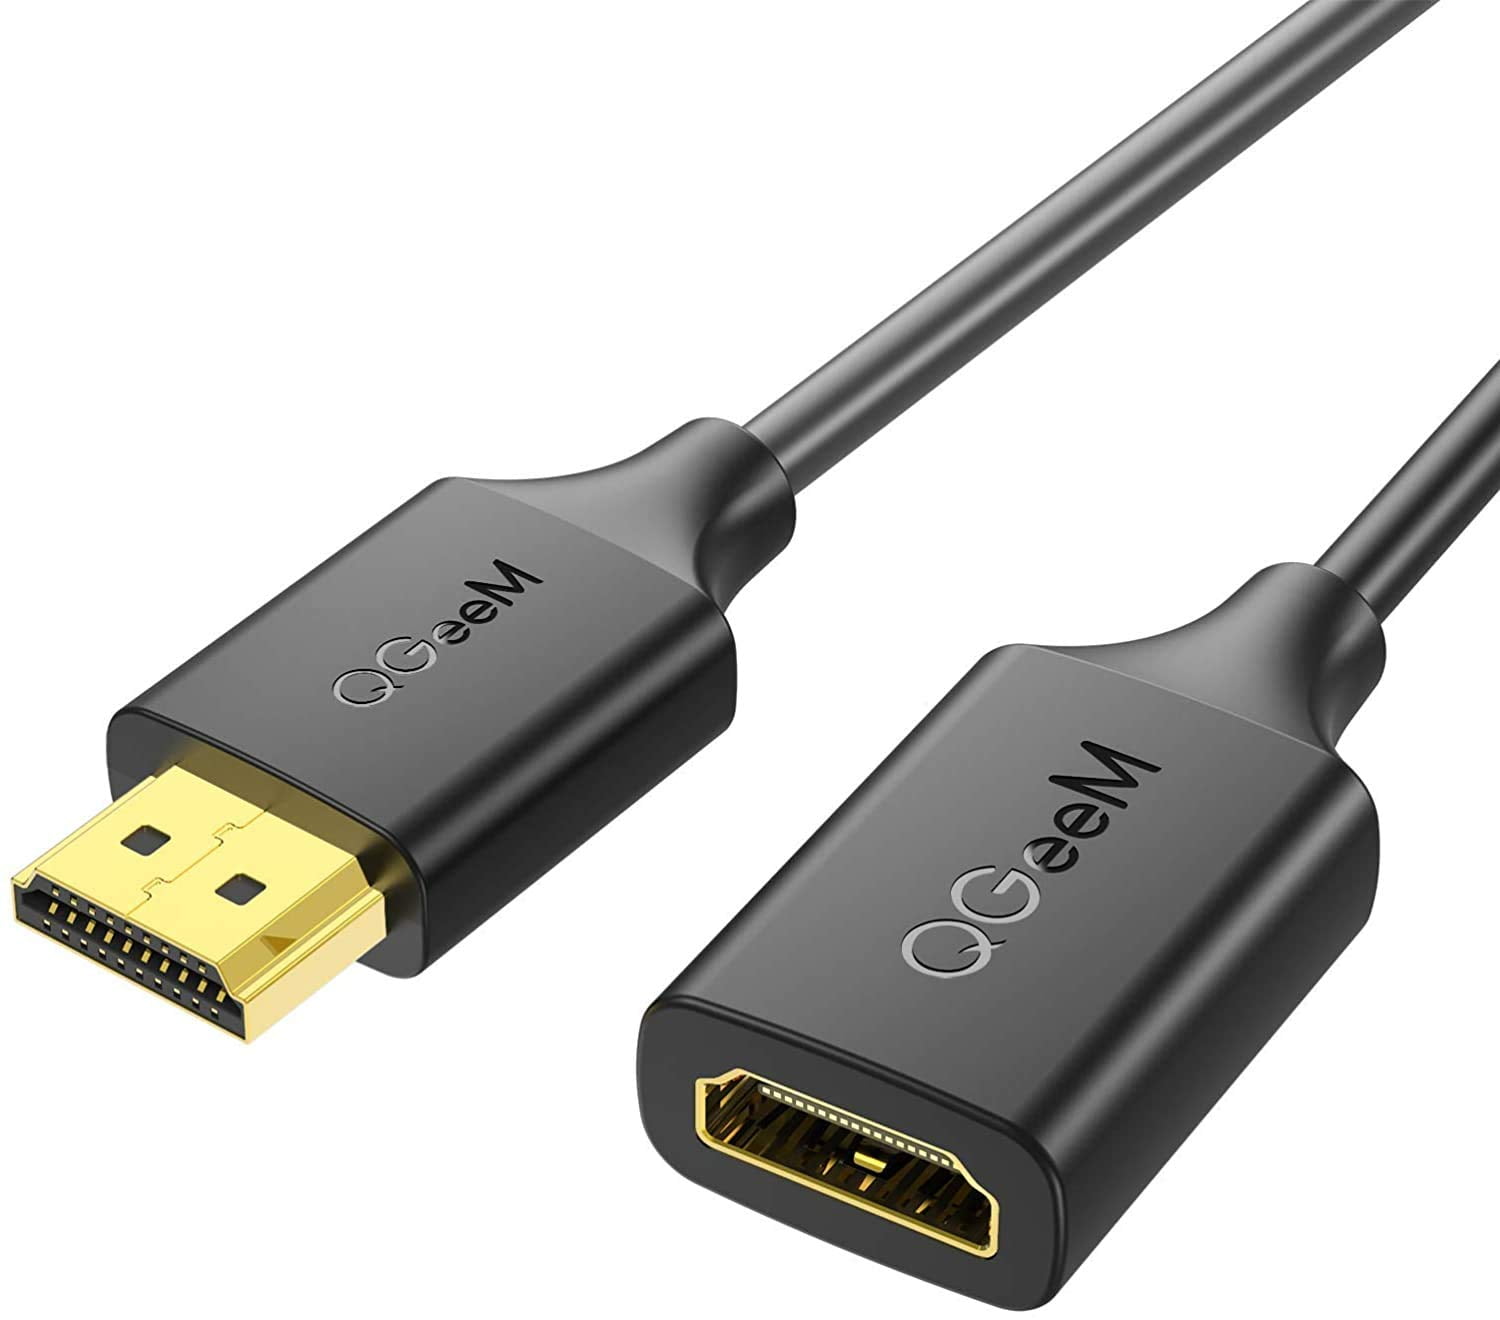 HDMI Cable 10FT, 4K HDMI 2.0 Extender Male to Female Cable,Supports 3D, HD,2160p,Compatible with Roku Fire Stick,for Laptop, PS4,HDTV,Monitor,Projector,HDMI Port Extender - Walmart.com